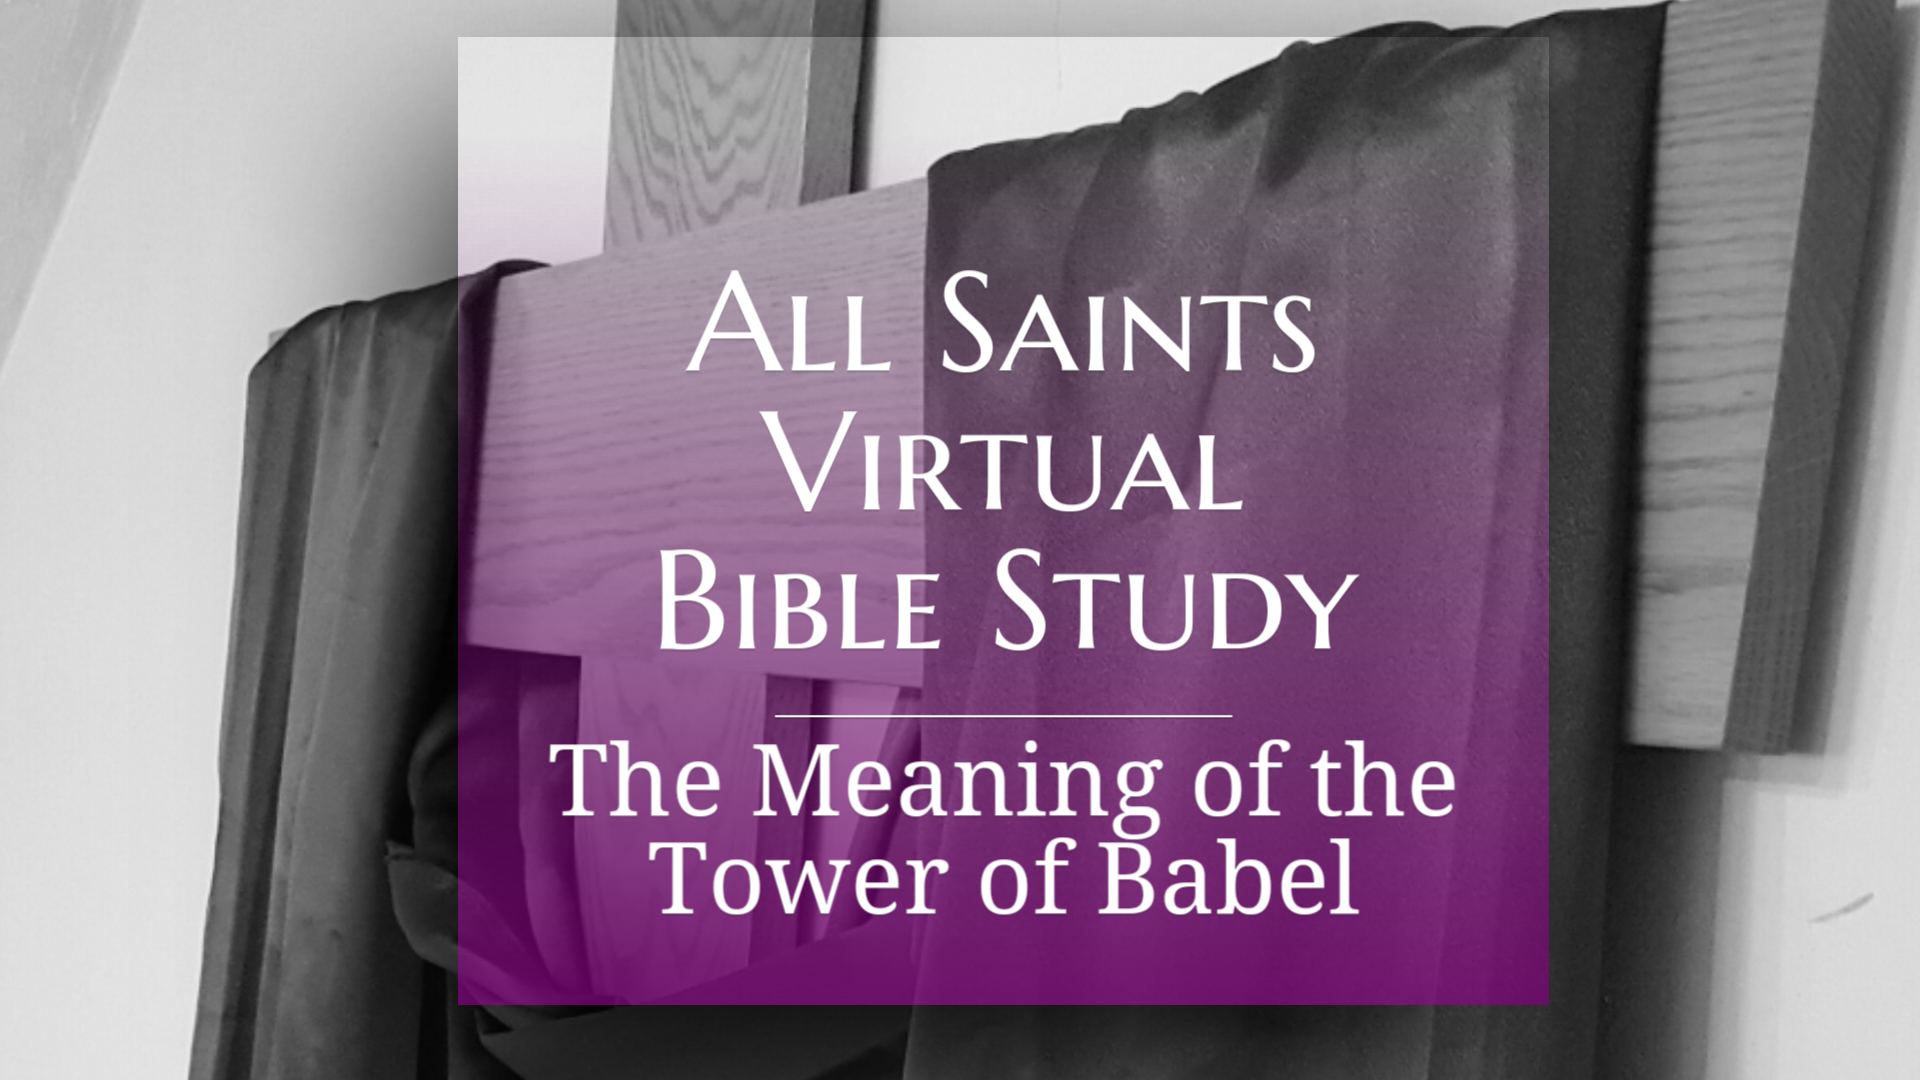 All Saints Virtual Bible Study - The Meaning of the Tower of Babel